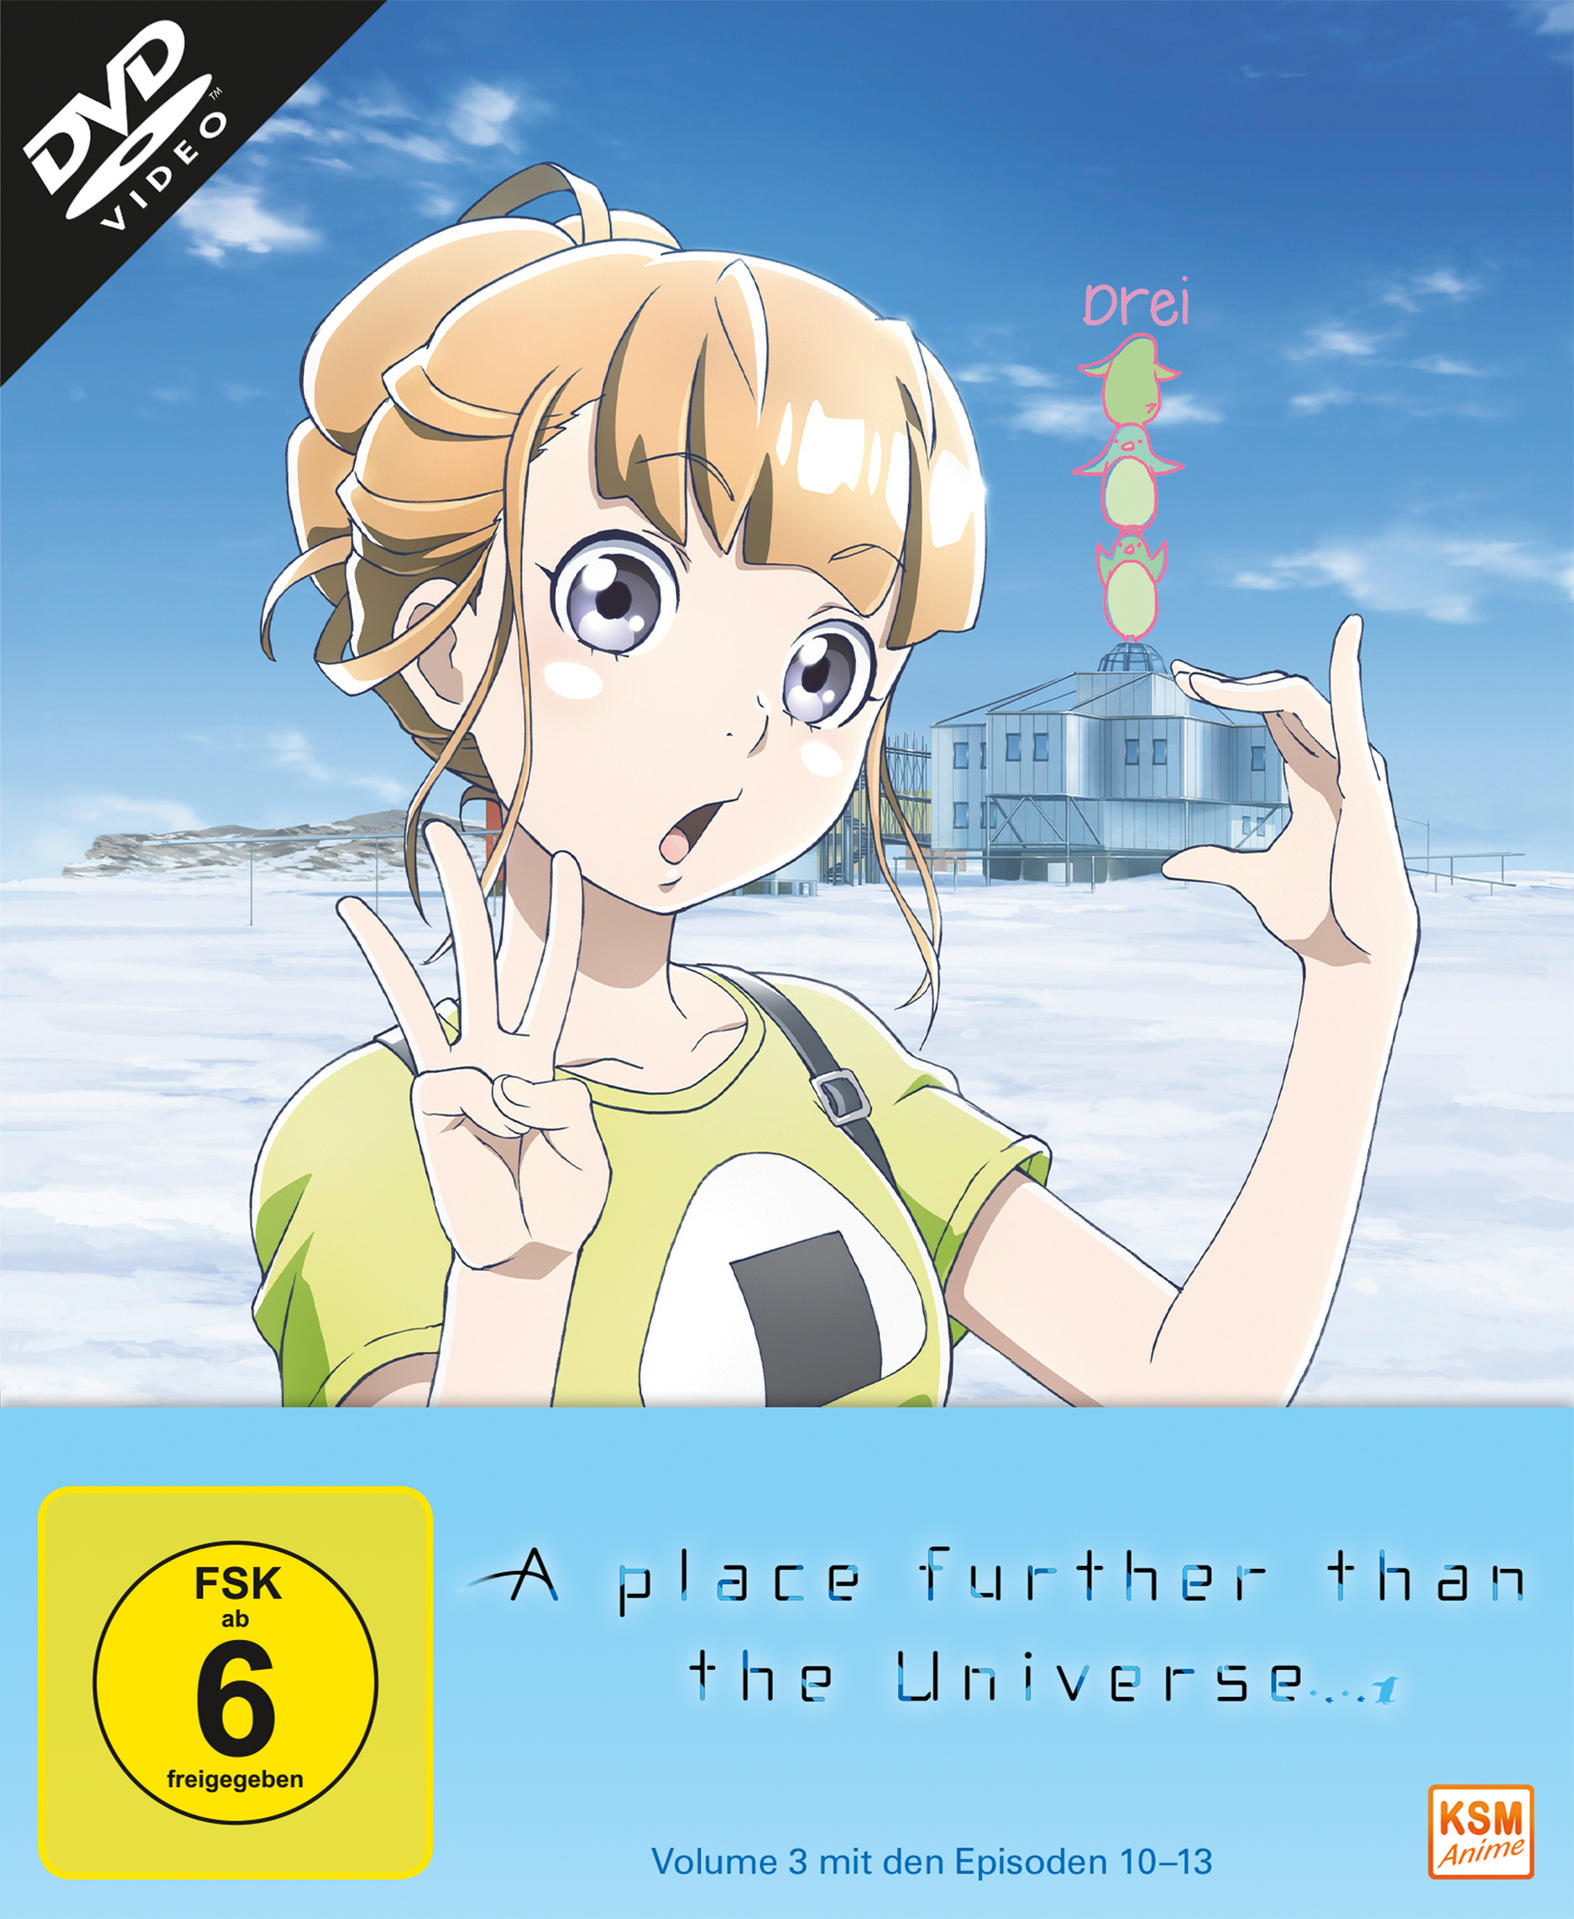 DVD Further Universe Place - 3 Than 10-13) The (Episode Volume A